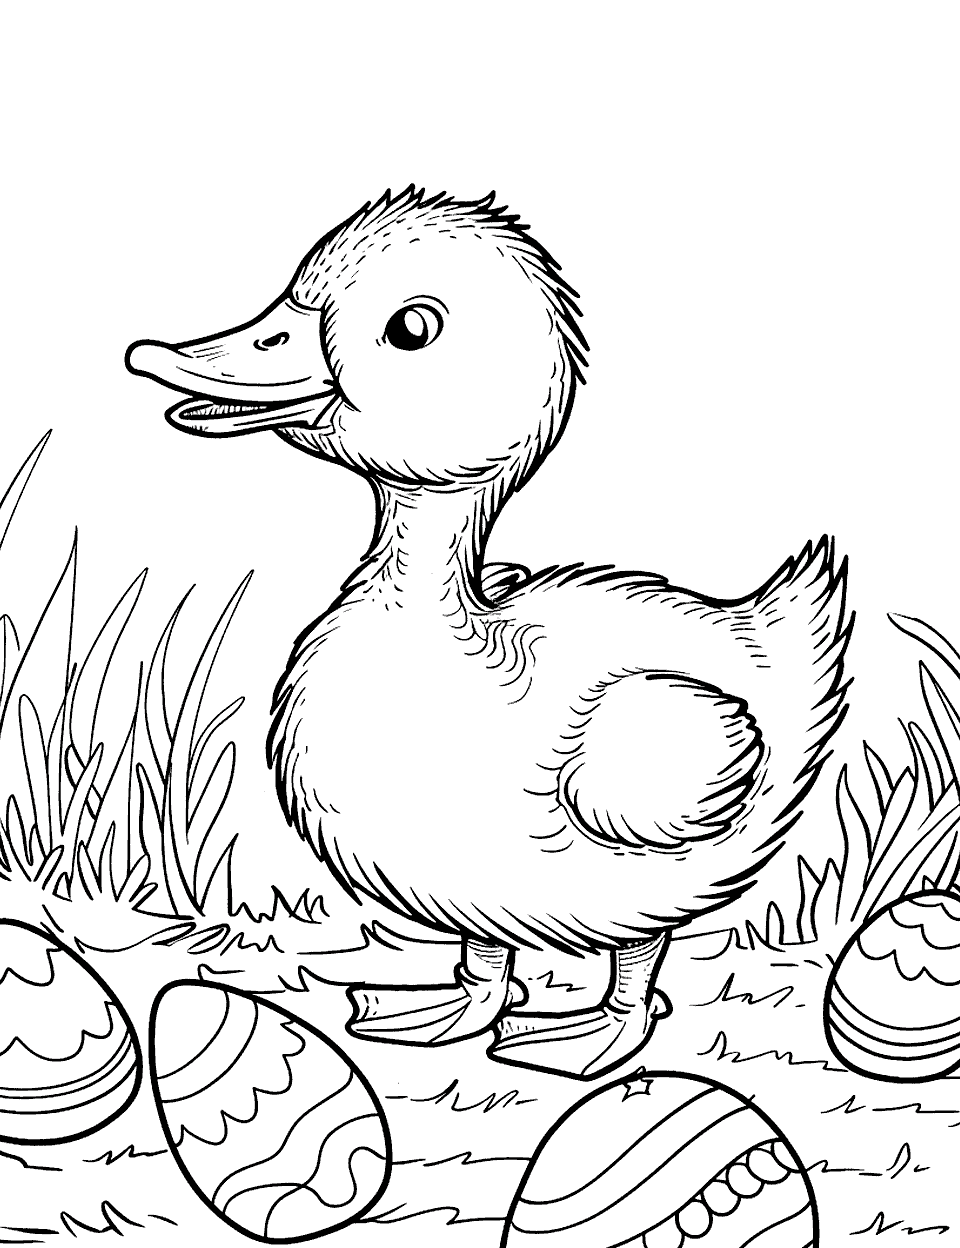 Easter Duck with Eggs Coloring Page - A cute duck surrounded by Easter eggs in a grassy field.